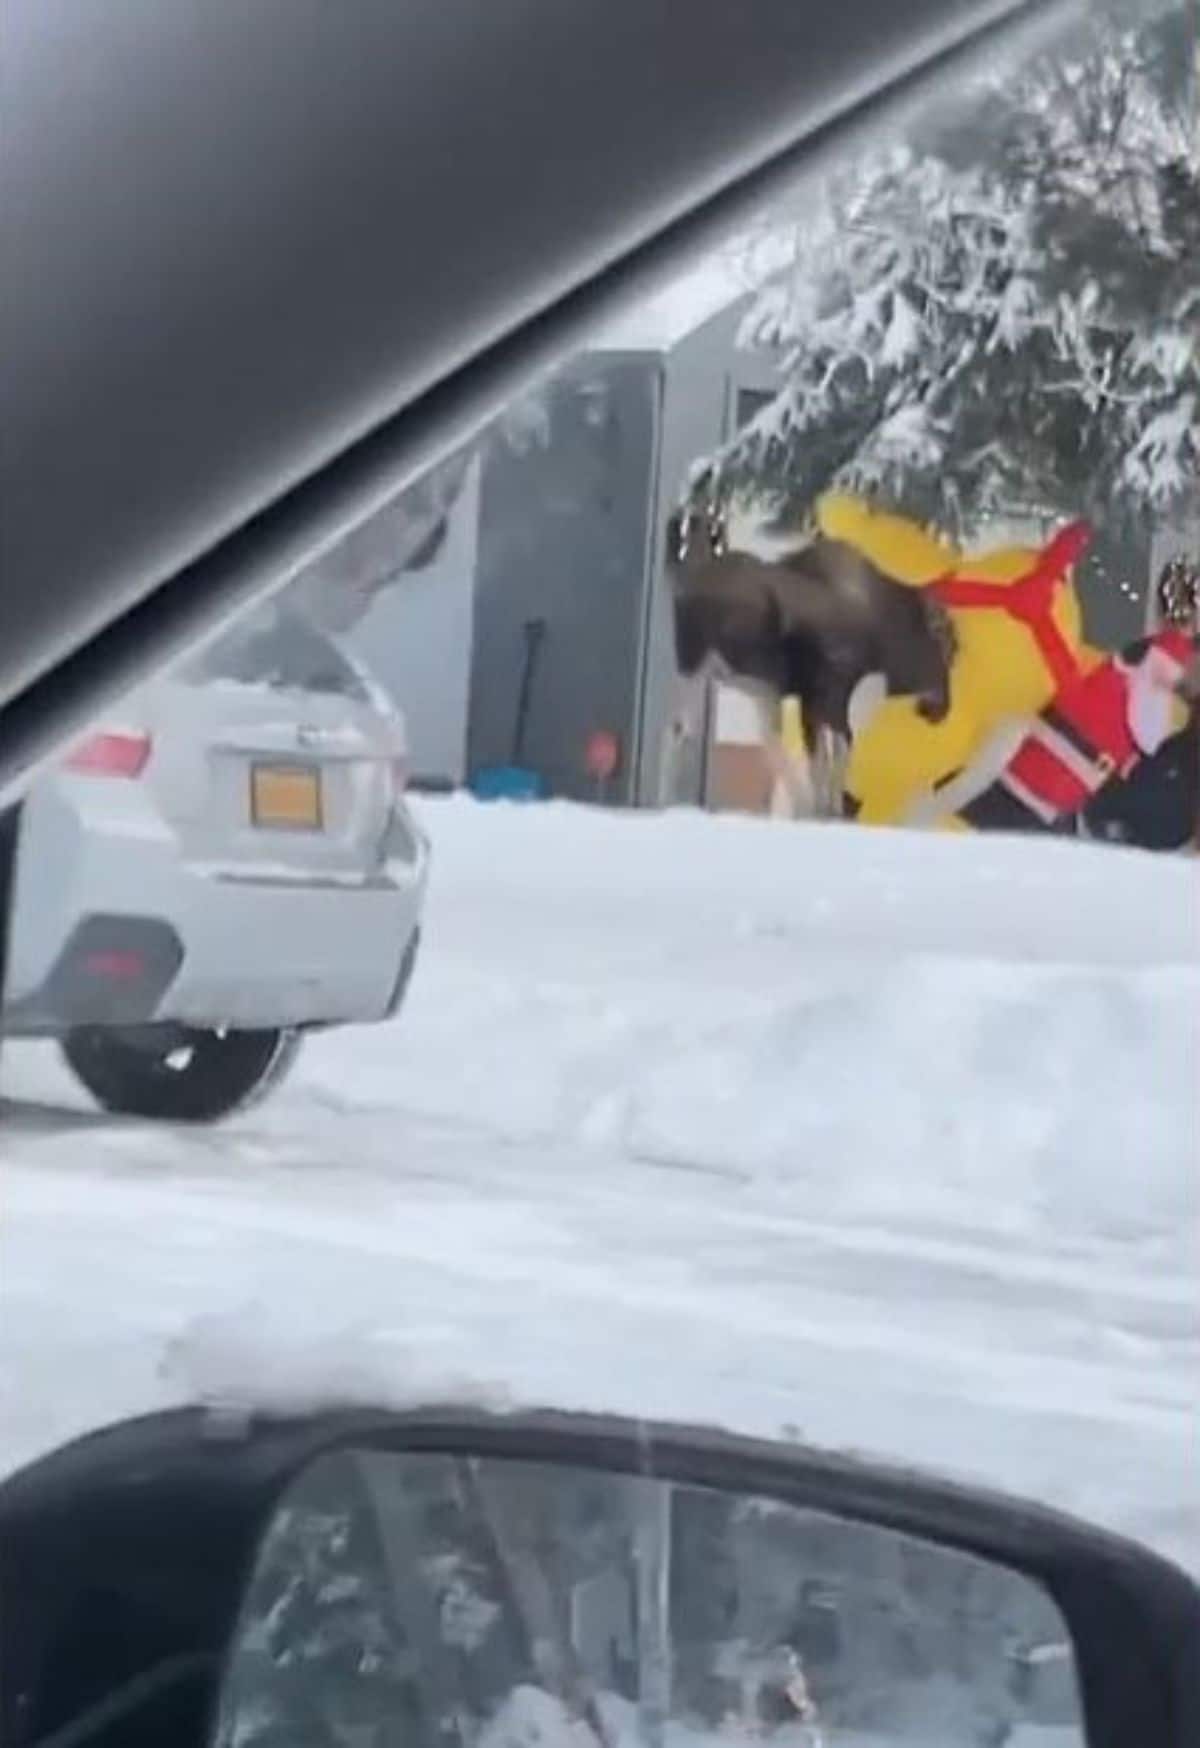 brown moose destroying christmas balloon decorations of santa outside a house